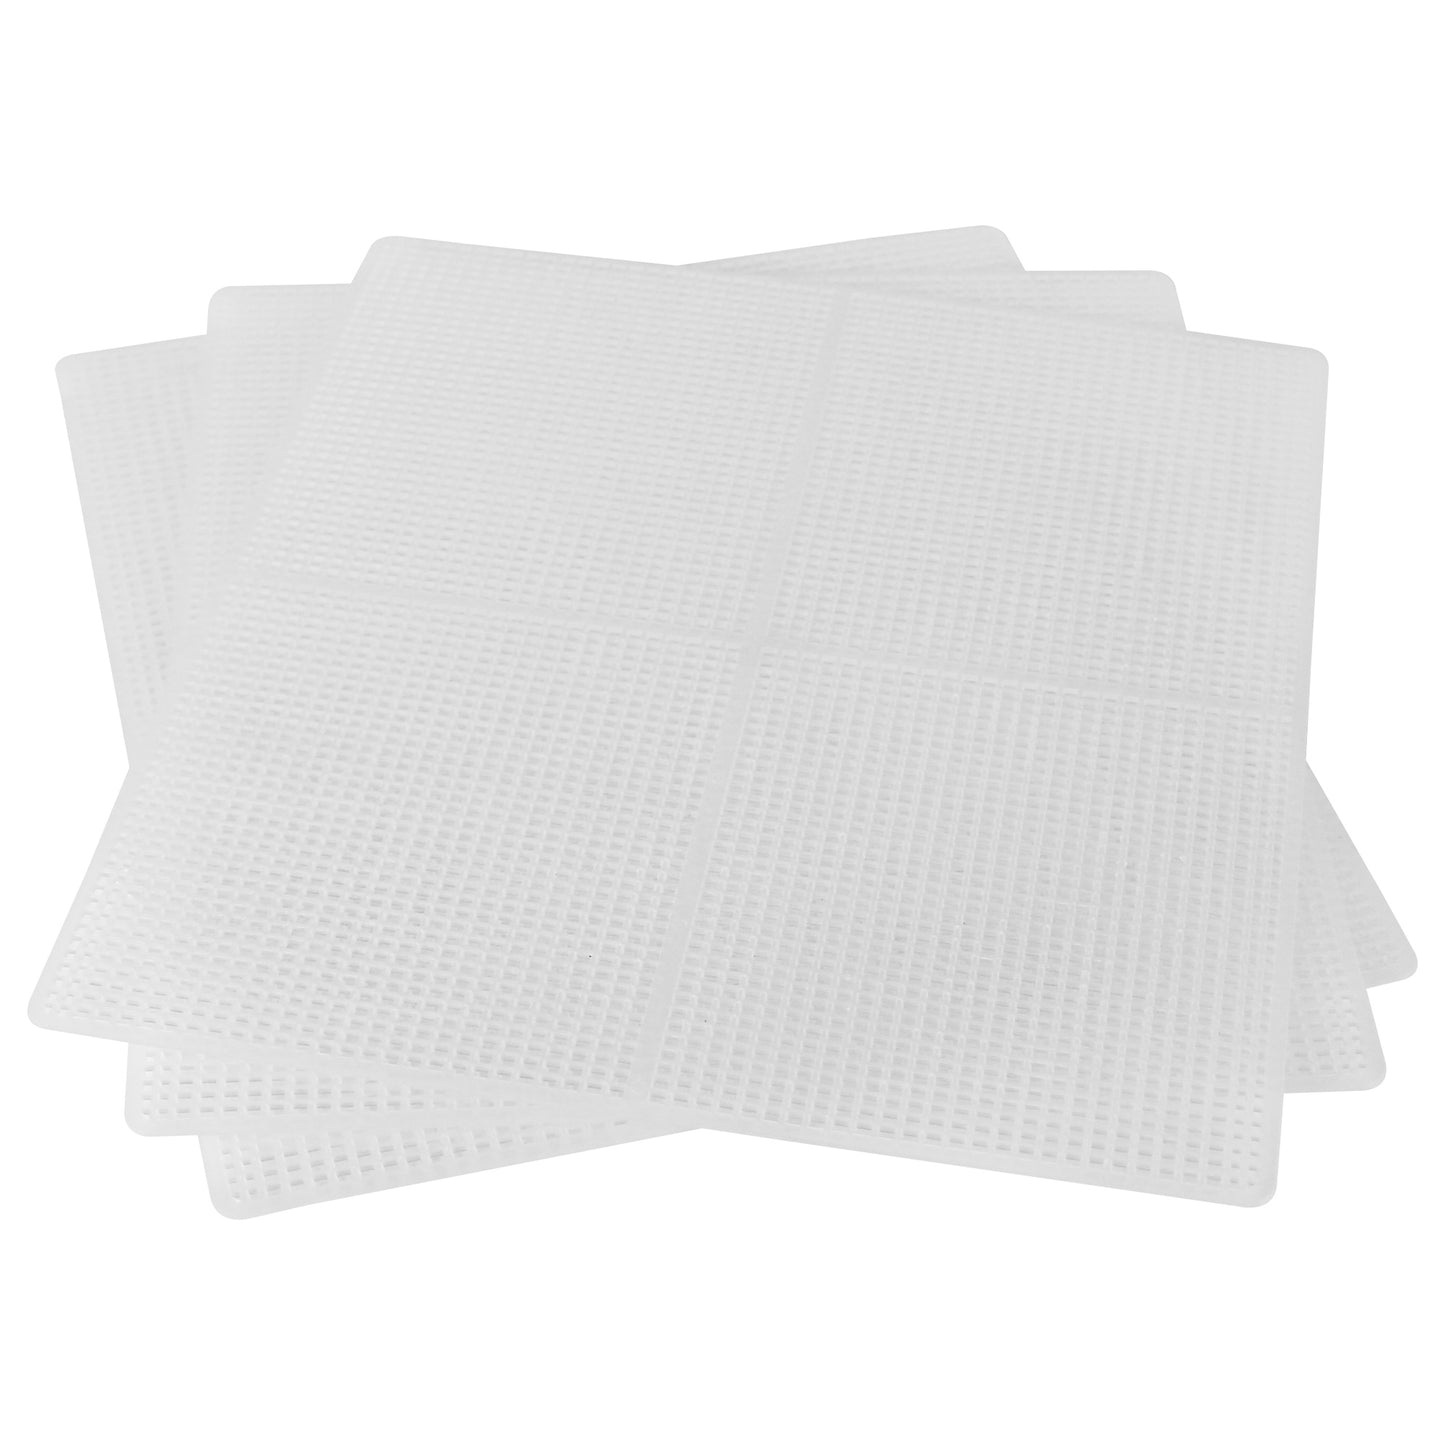 Dehydrator Mesh Sheet for 10 trays and 6 trays Machine